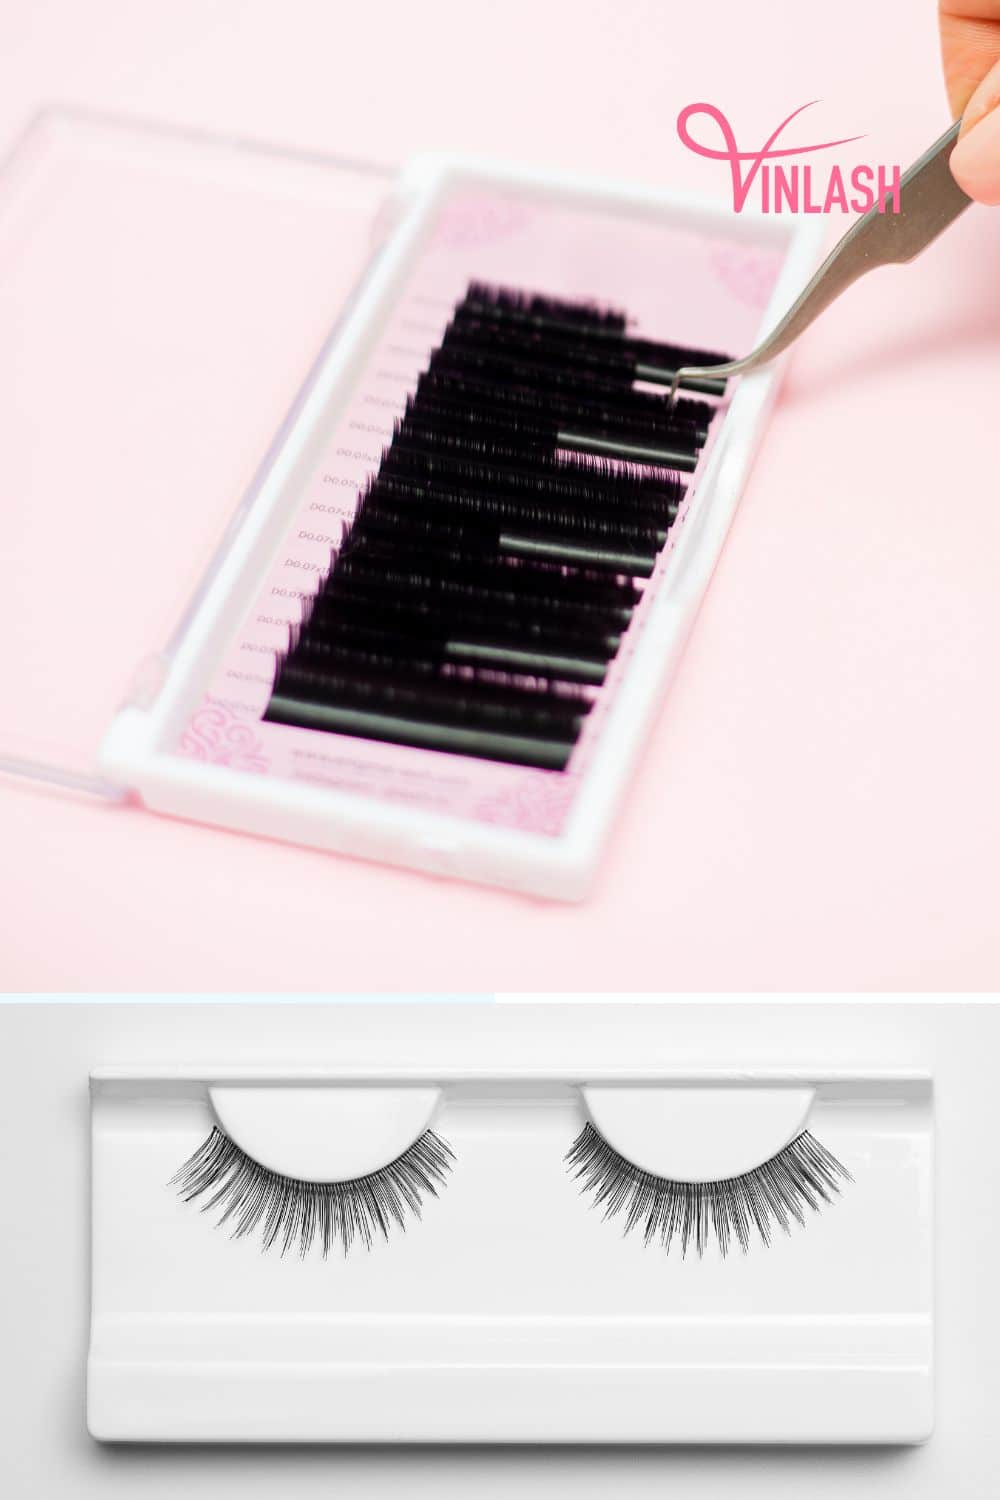 comprehensive-guide-to-choosing-a-lash-packaging-vendor-for-your-lash-business-4